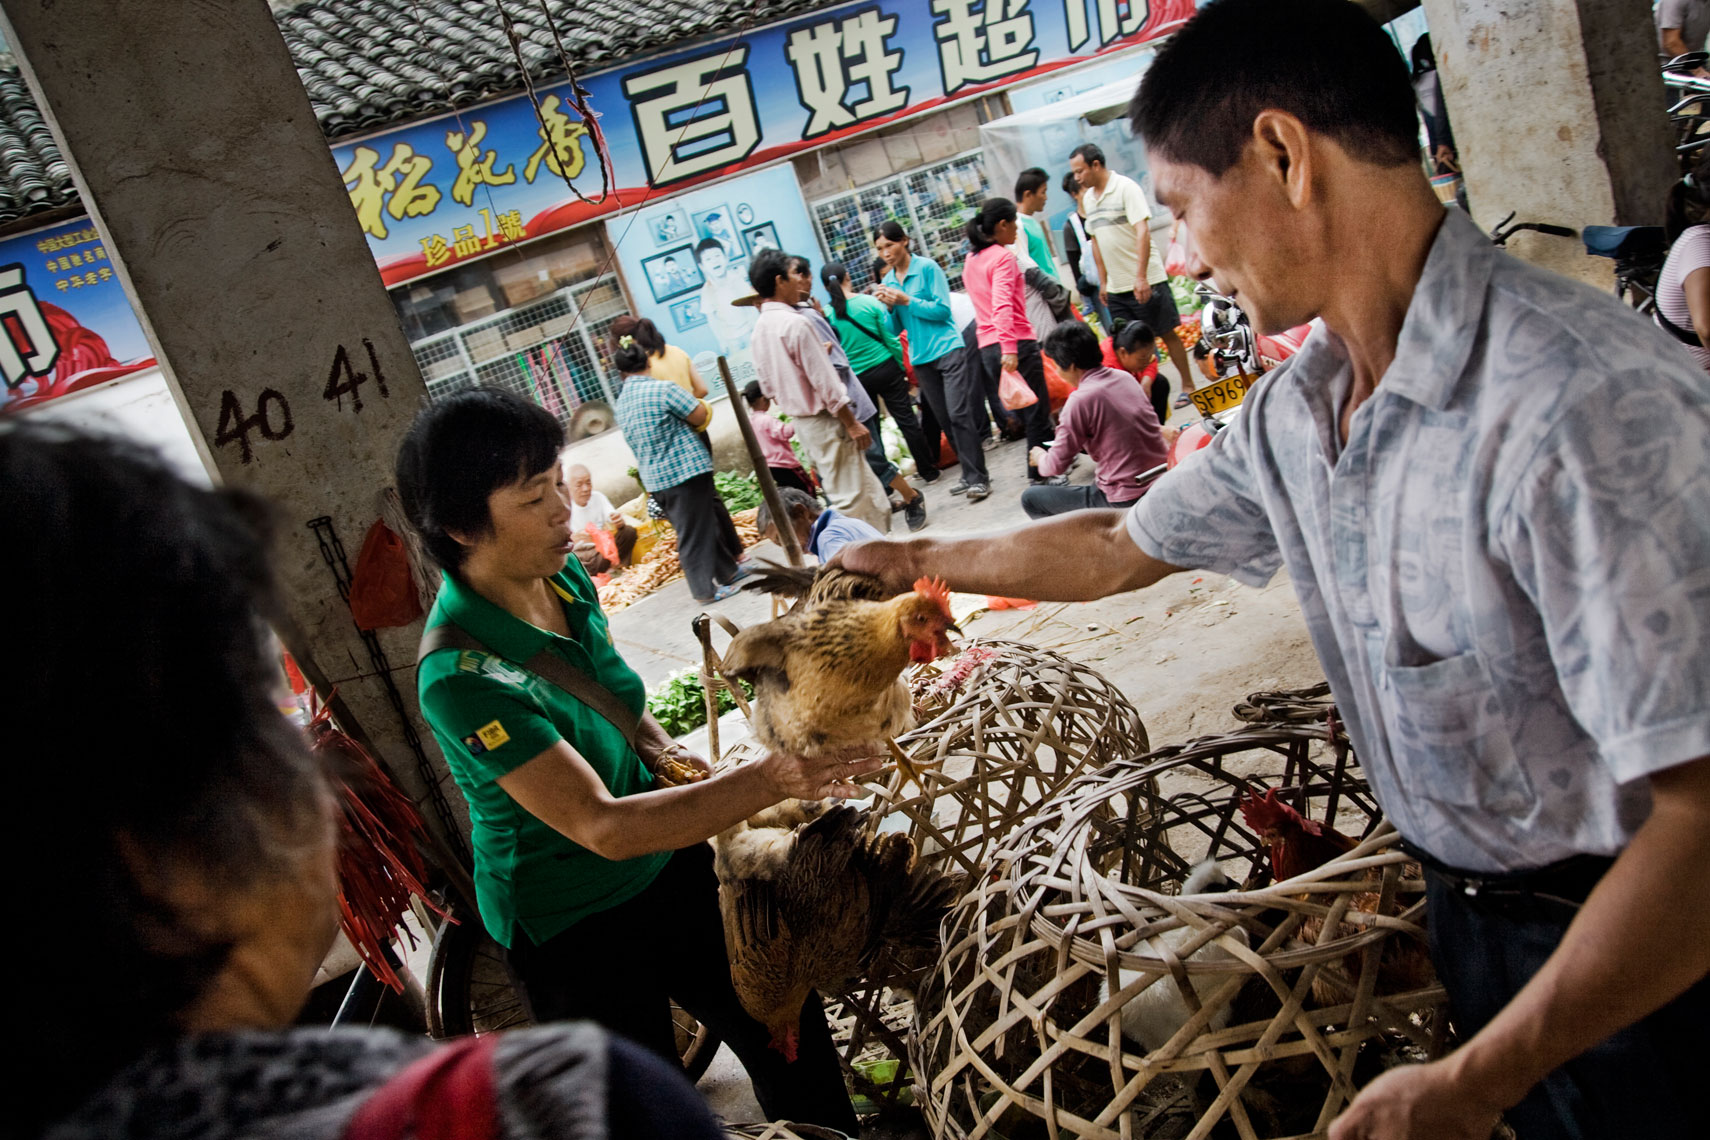 CHINA. Xingping, Guangxi Province, September 2012. Central market. The market takes place on the days that have a number 3 in their date number.